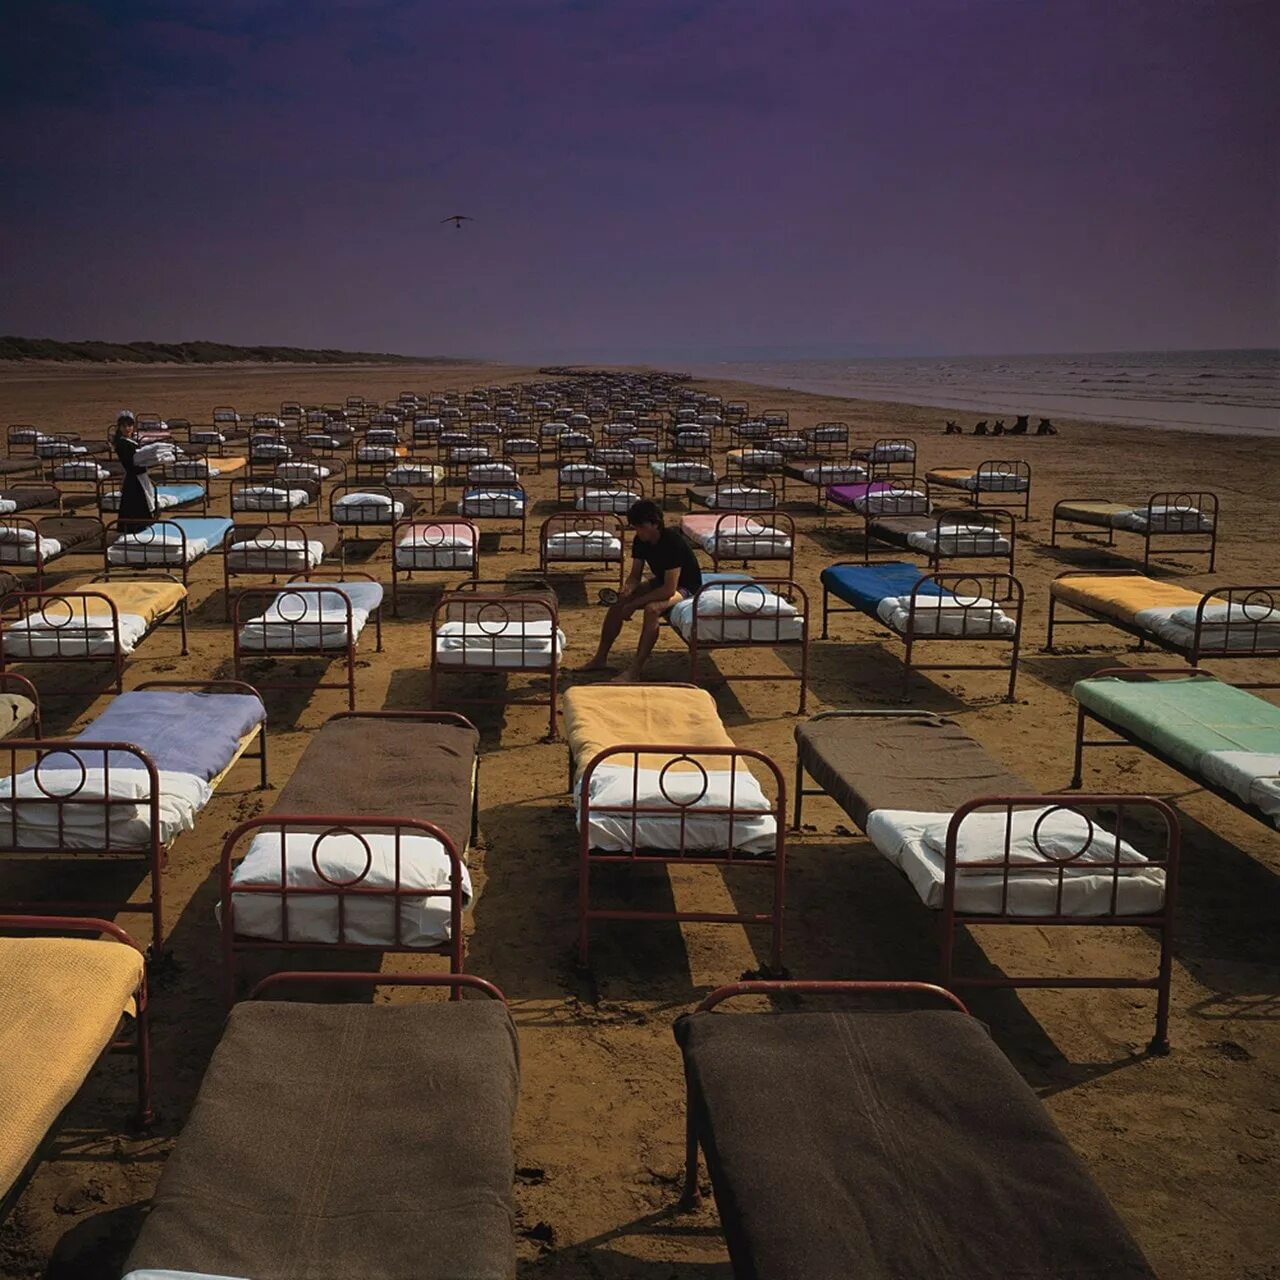 Momentary lapse of reasoning. Pink Floyd a Momentary lapse of reason 1987. Pink Floyd a Momentary lapse of reason CD. Pink Floyd a Momentary lapse of reason обложка. Pink Floyd 1987 a Momentary lapse of reason 2021.